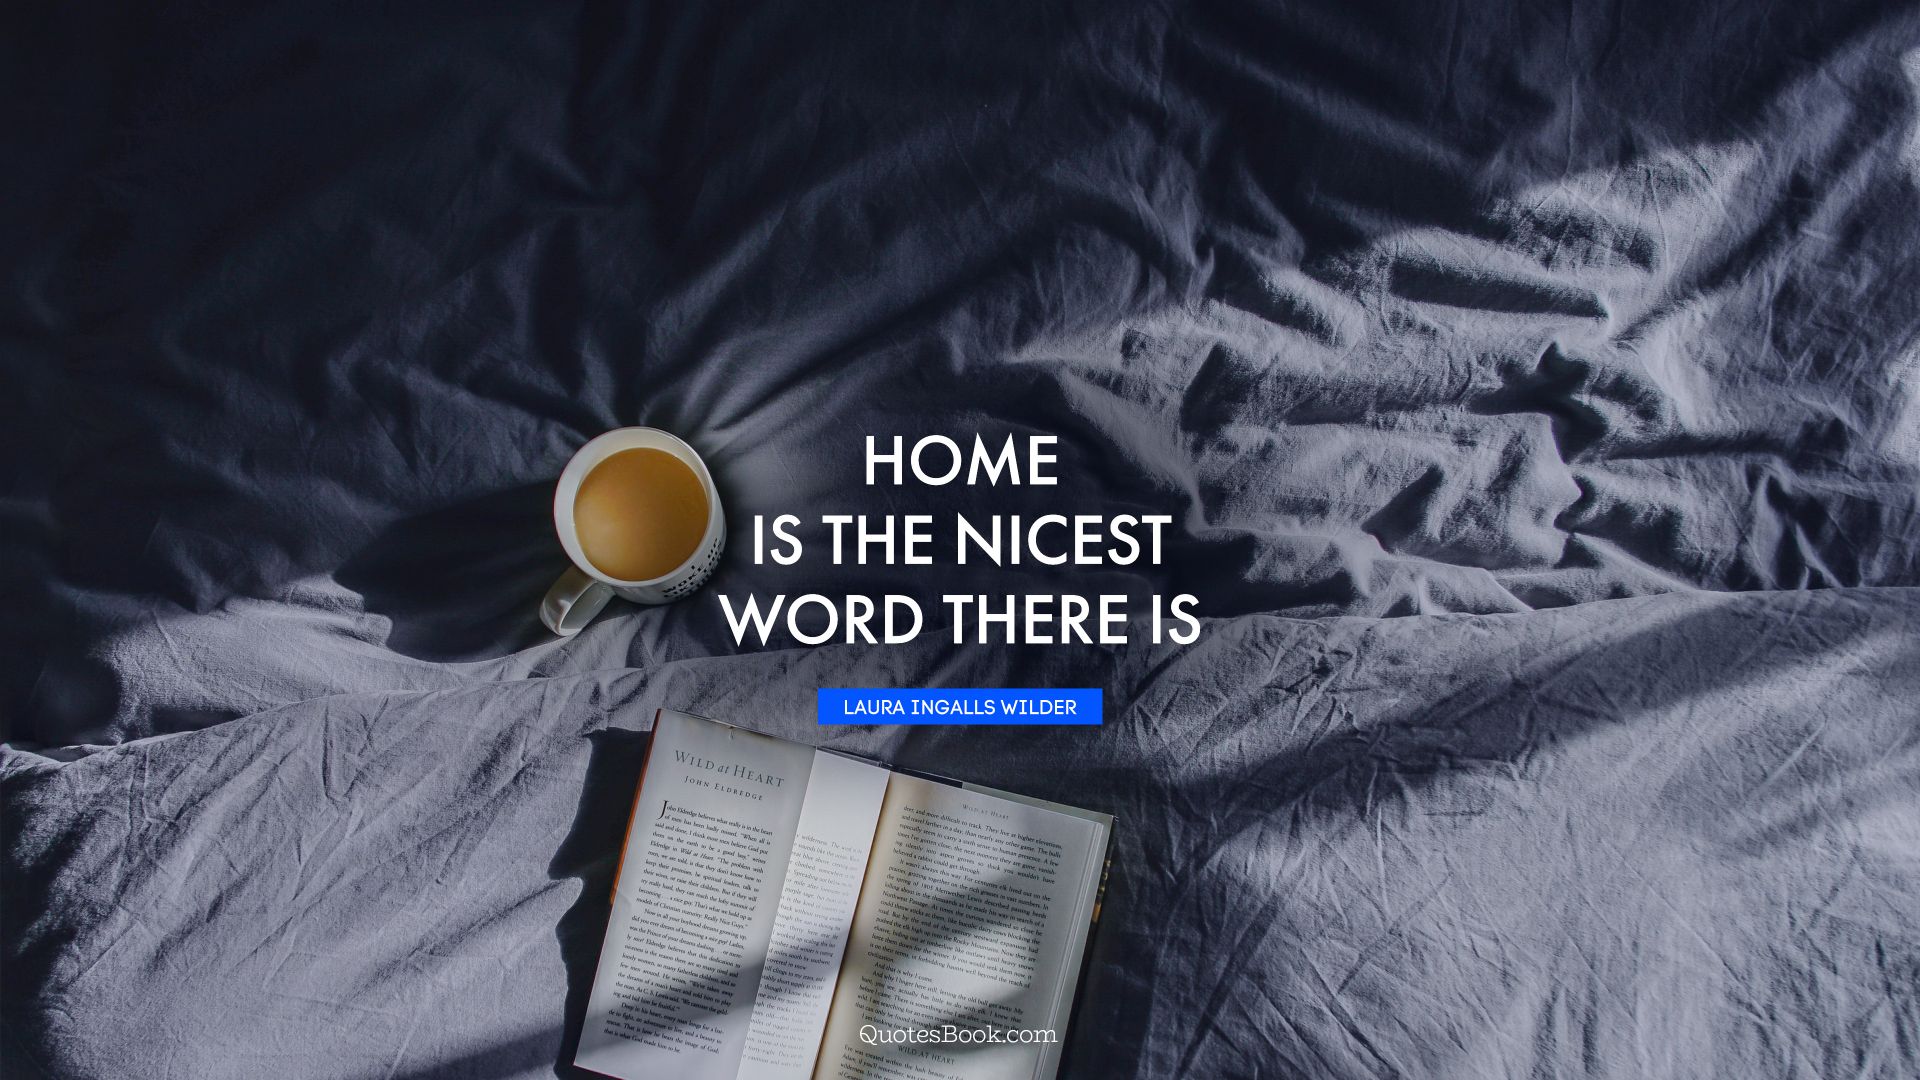 Home is the nicest word there is. - Quote by Laura Ingalls Wilder